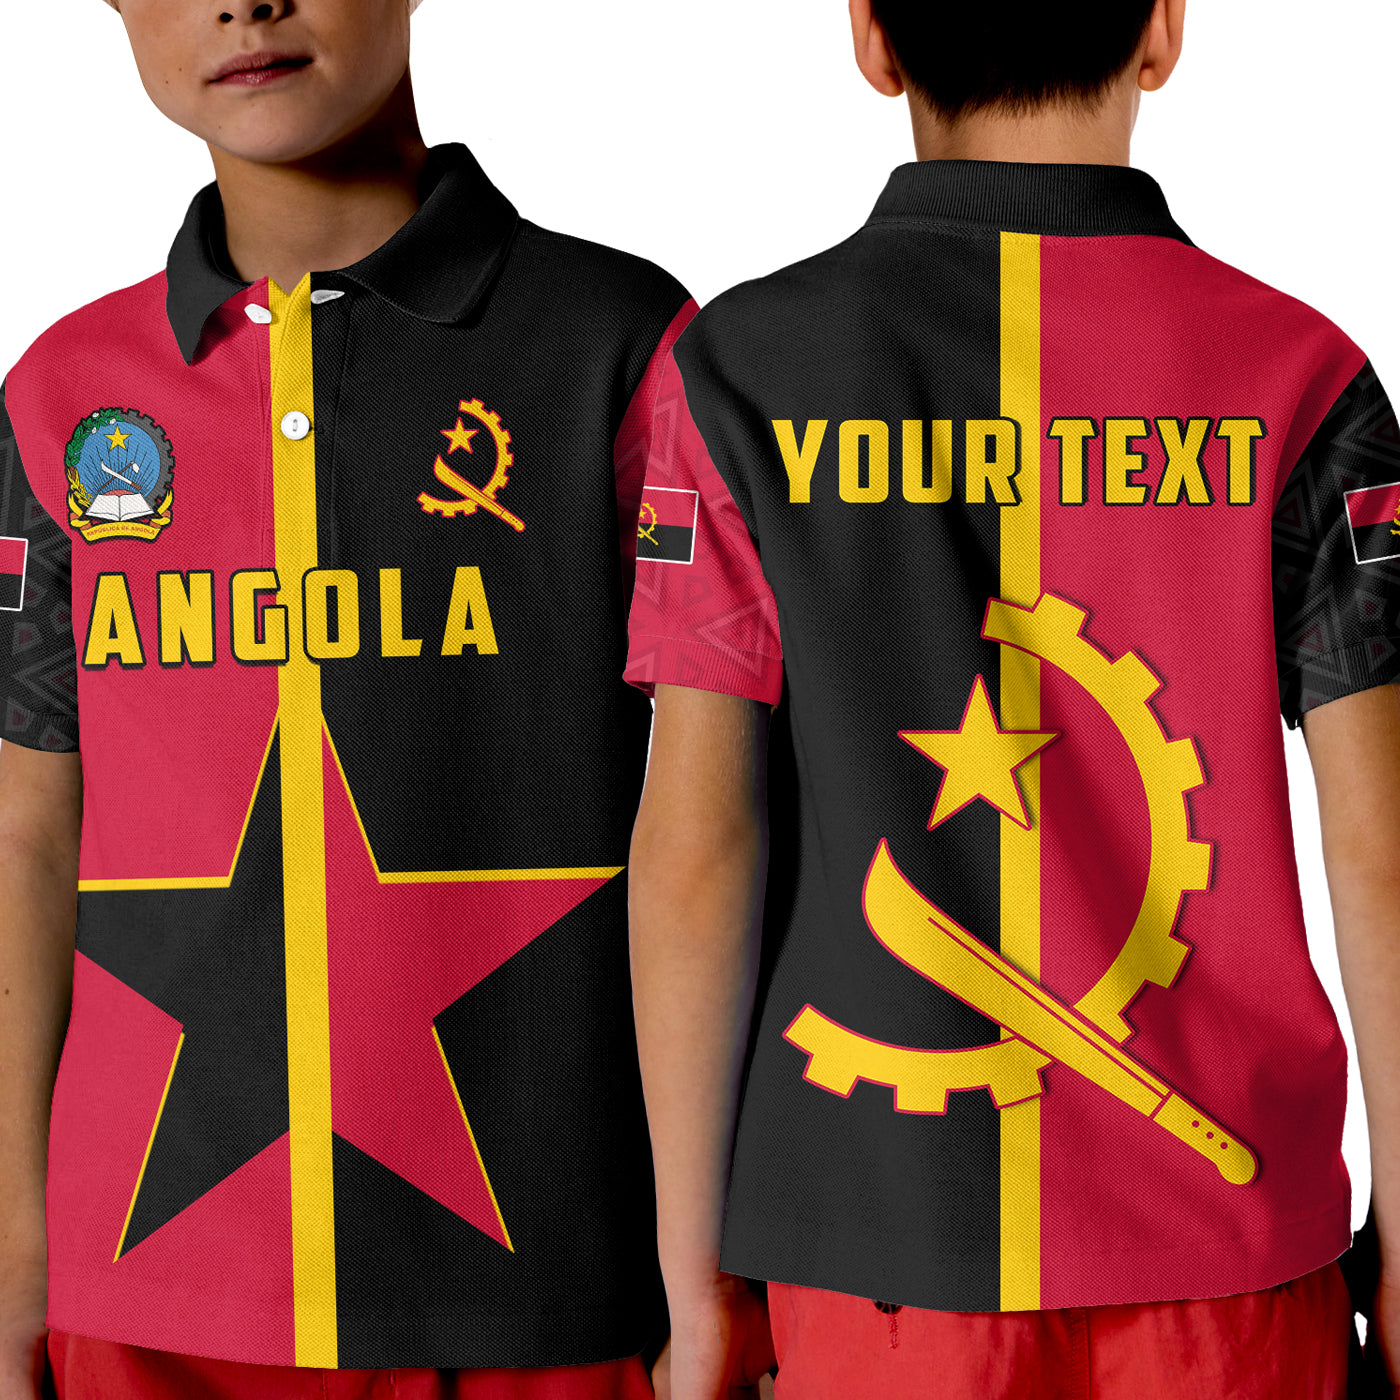 custom-personalised-angola-polo-shirt-kid-star-and-flag-style-sporty